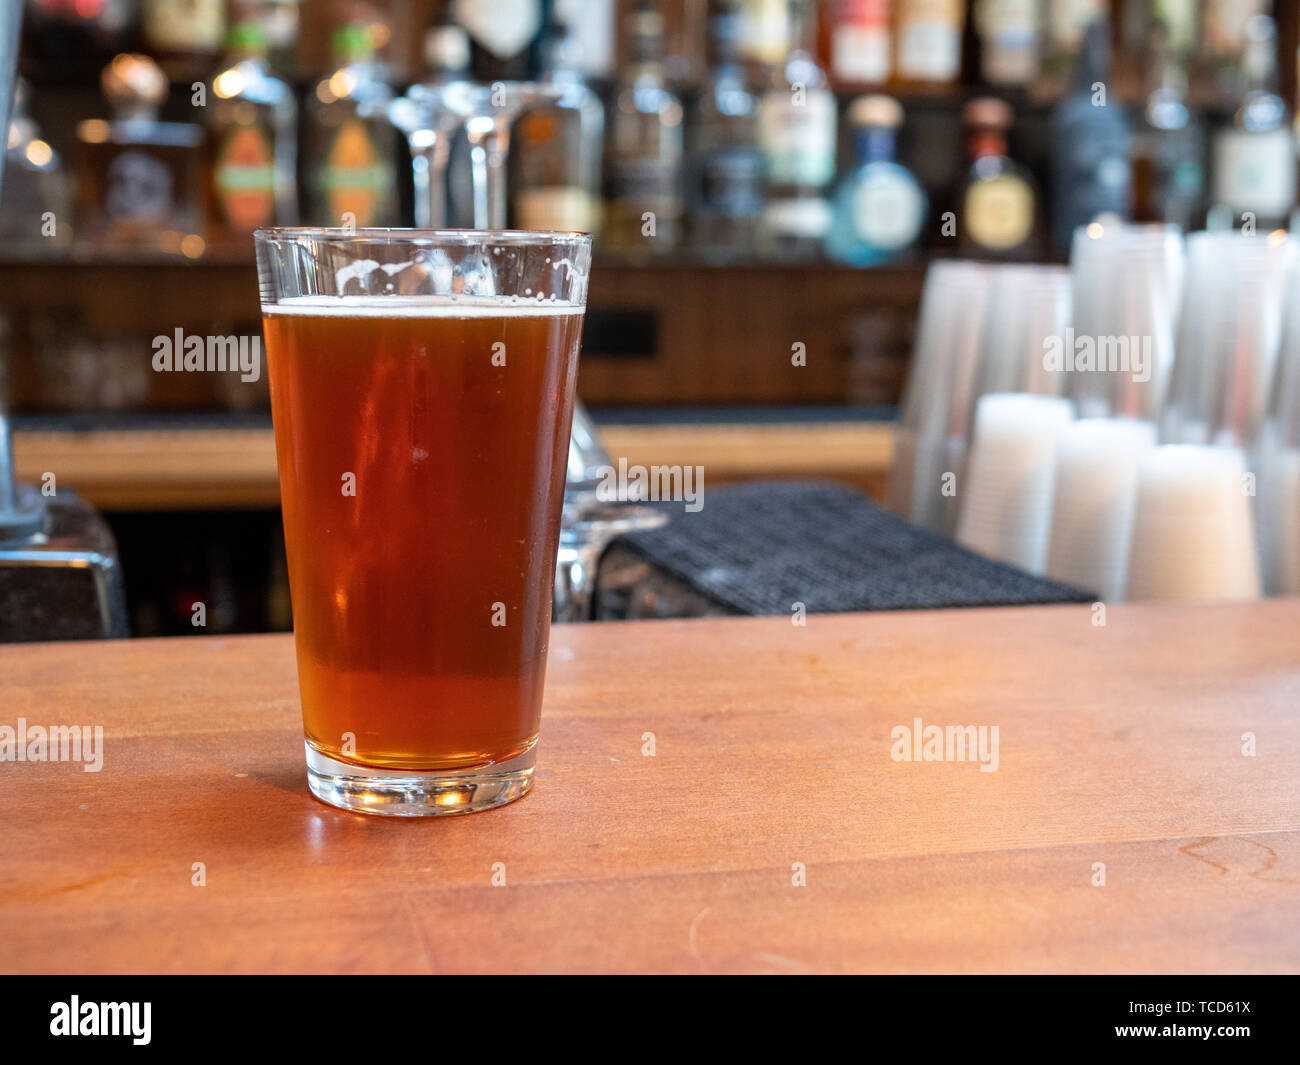 Pint glass of beer sitting on bar counter in the day time Stock Photo